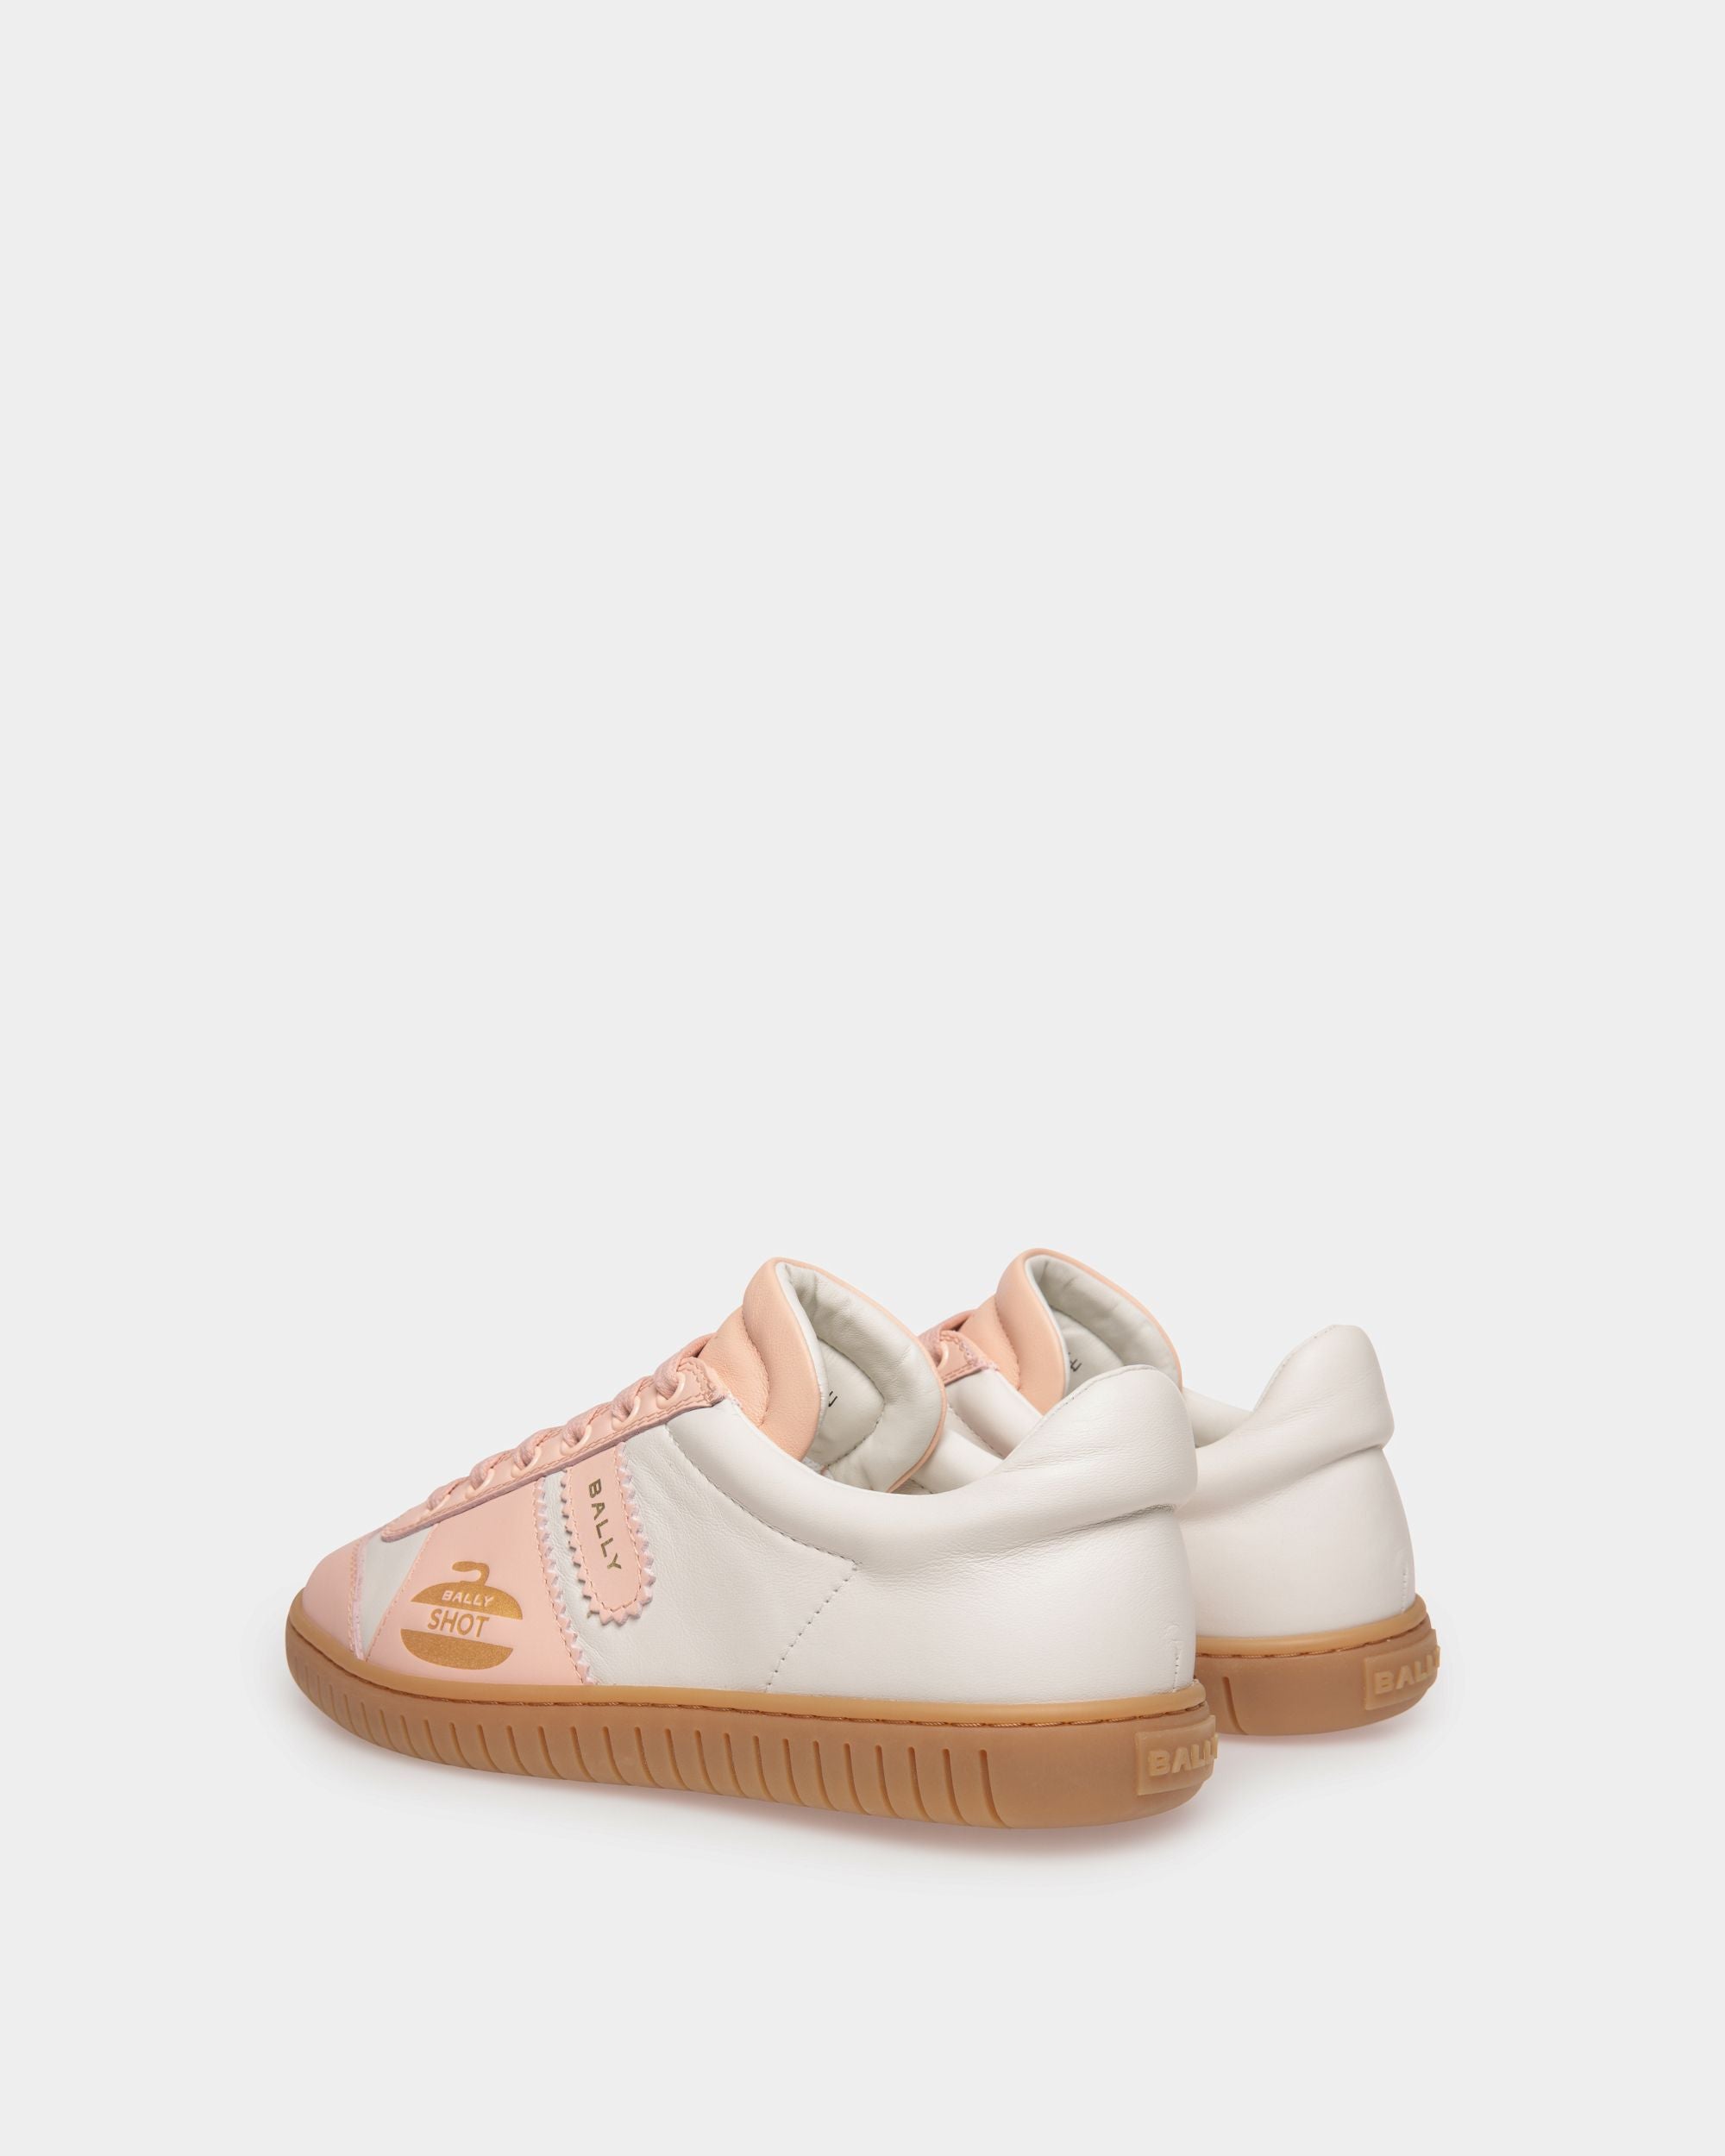 Player | Women's Sneaker in White and Baby Pink Leather | Bally | Still Life 3/4 Back